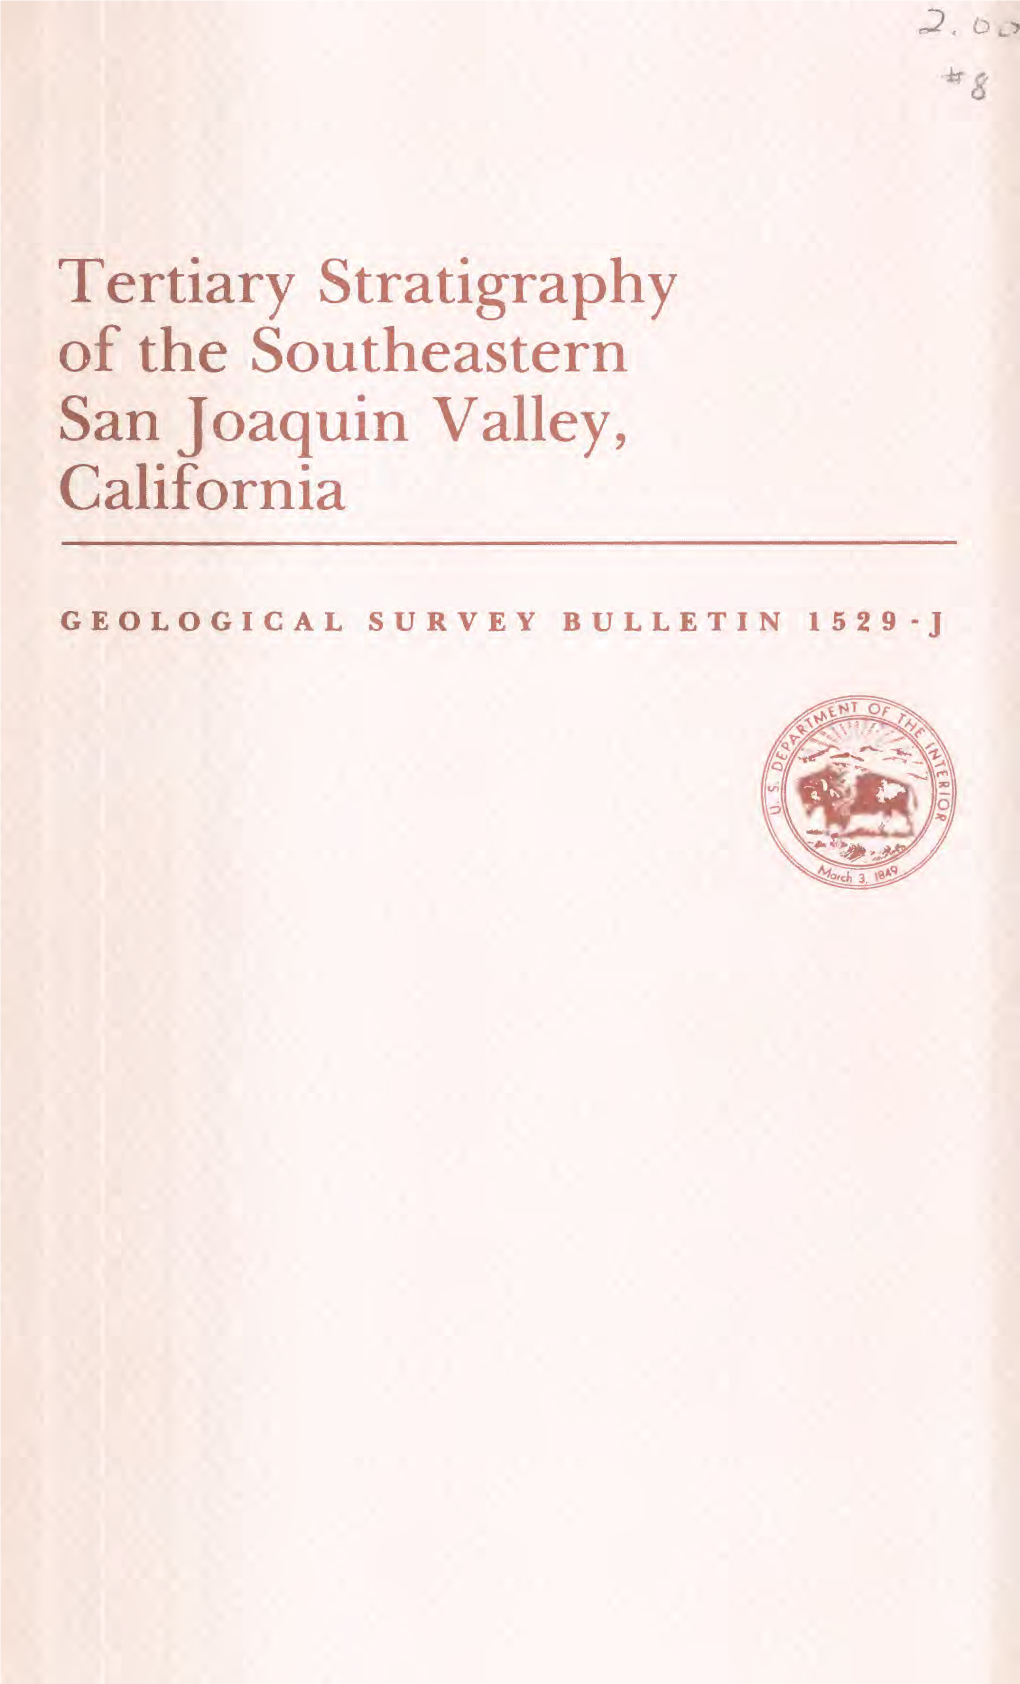 Tertiary Stratigraphy of the Southeastern San Joaquin Valley, California